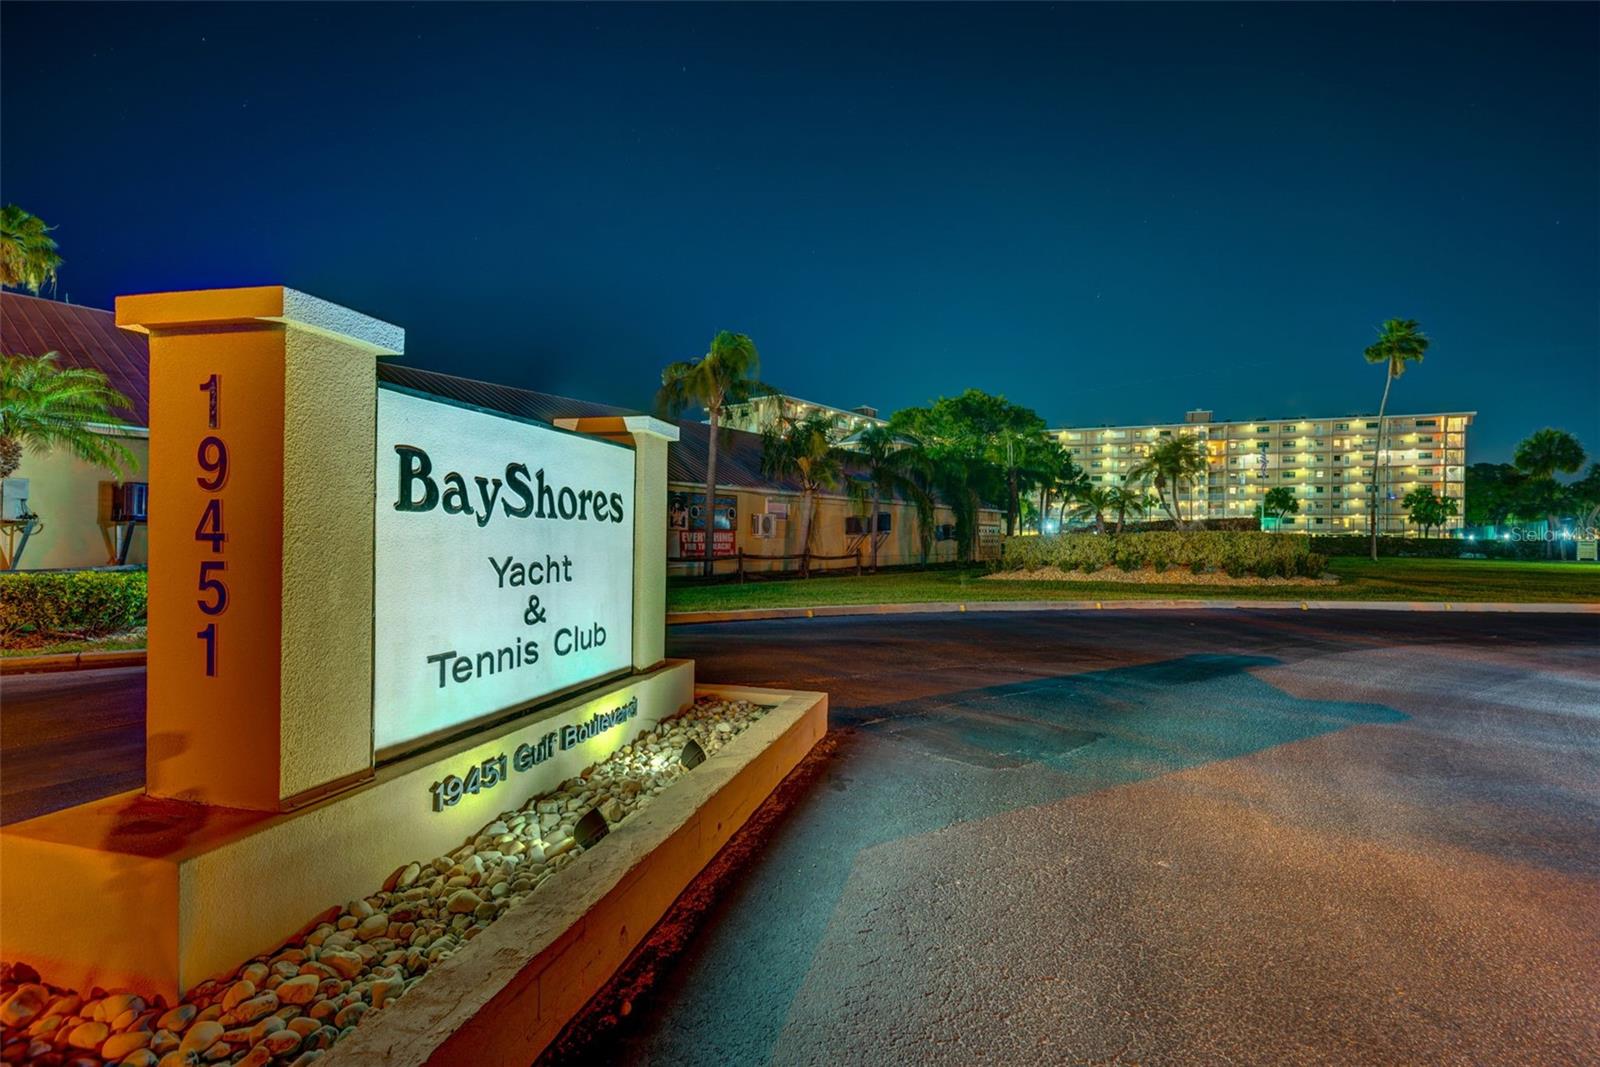 Welcome to Bay Shores Yacht & Tennis Club!